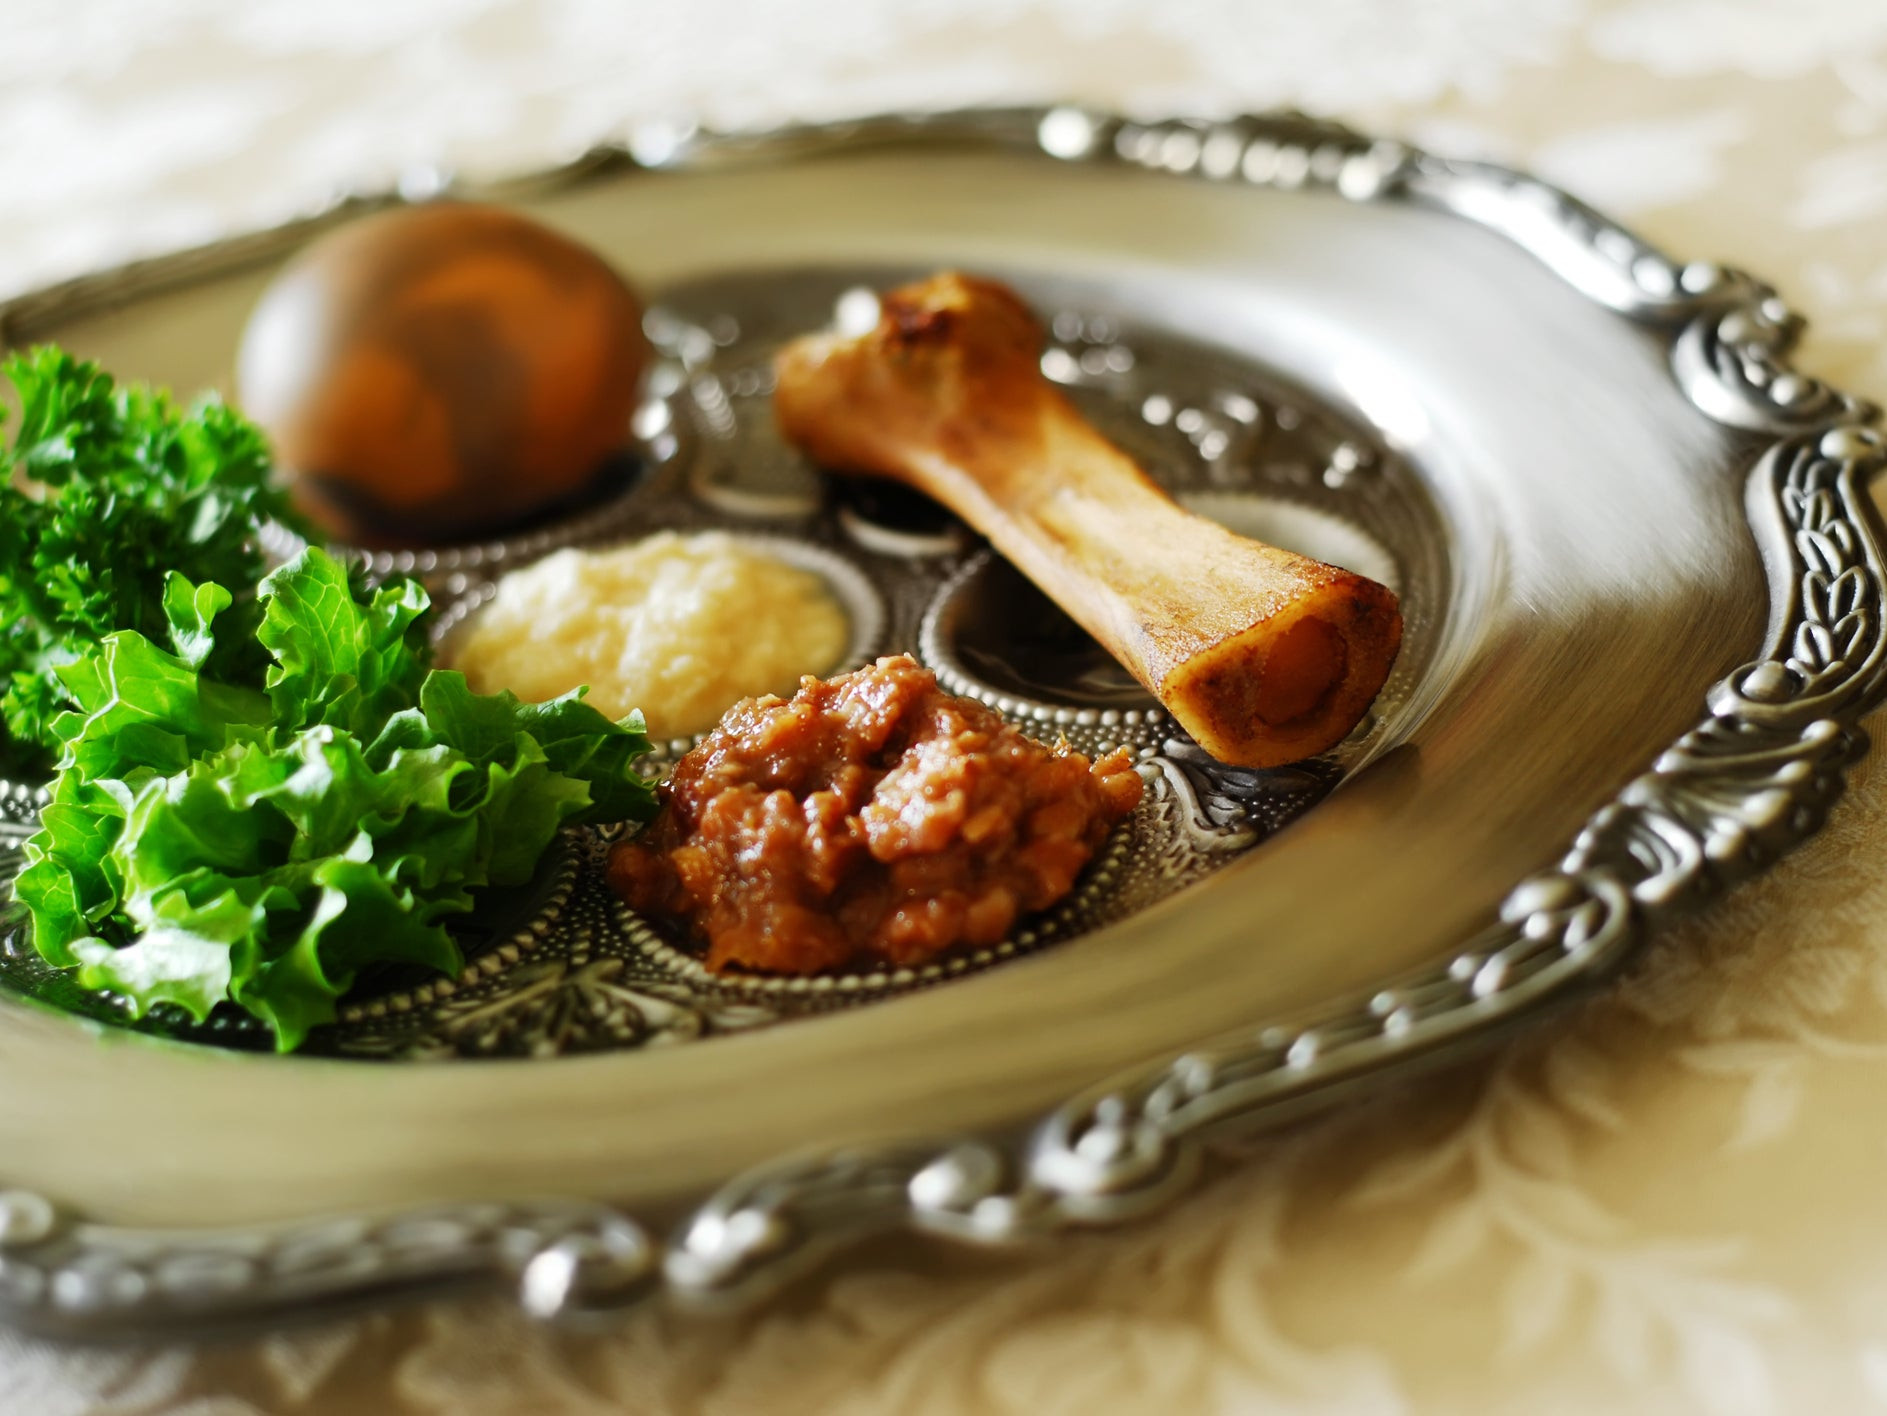 Food For Passover
 Passover 2019 The meaning of the foods eaten during the